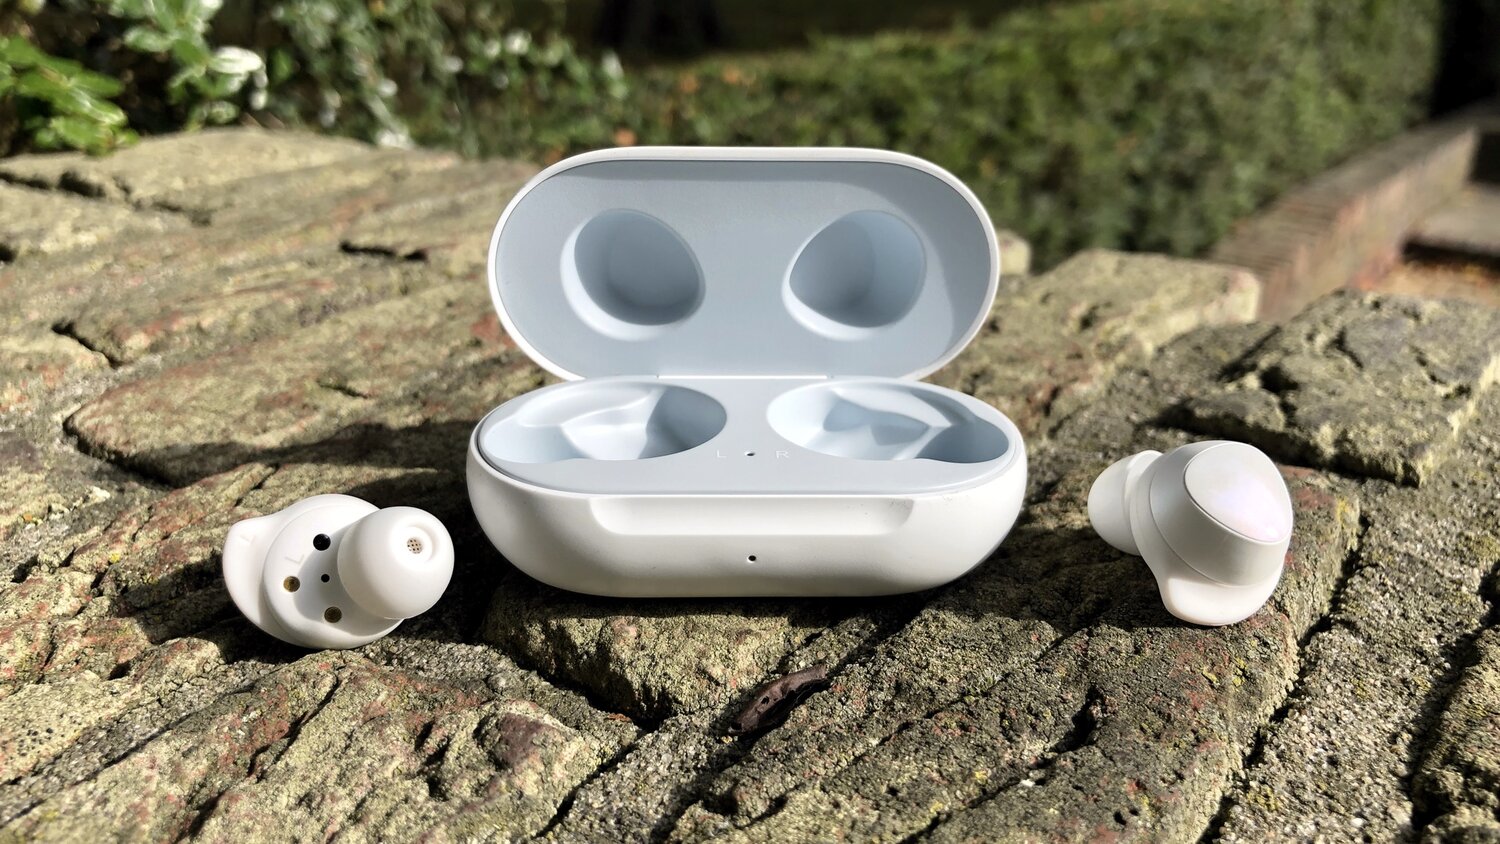 Review Samsung Galaxy Buds with the app VS without the app